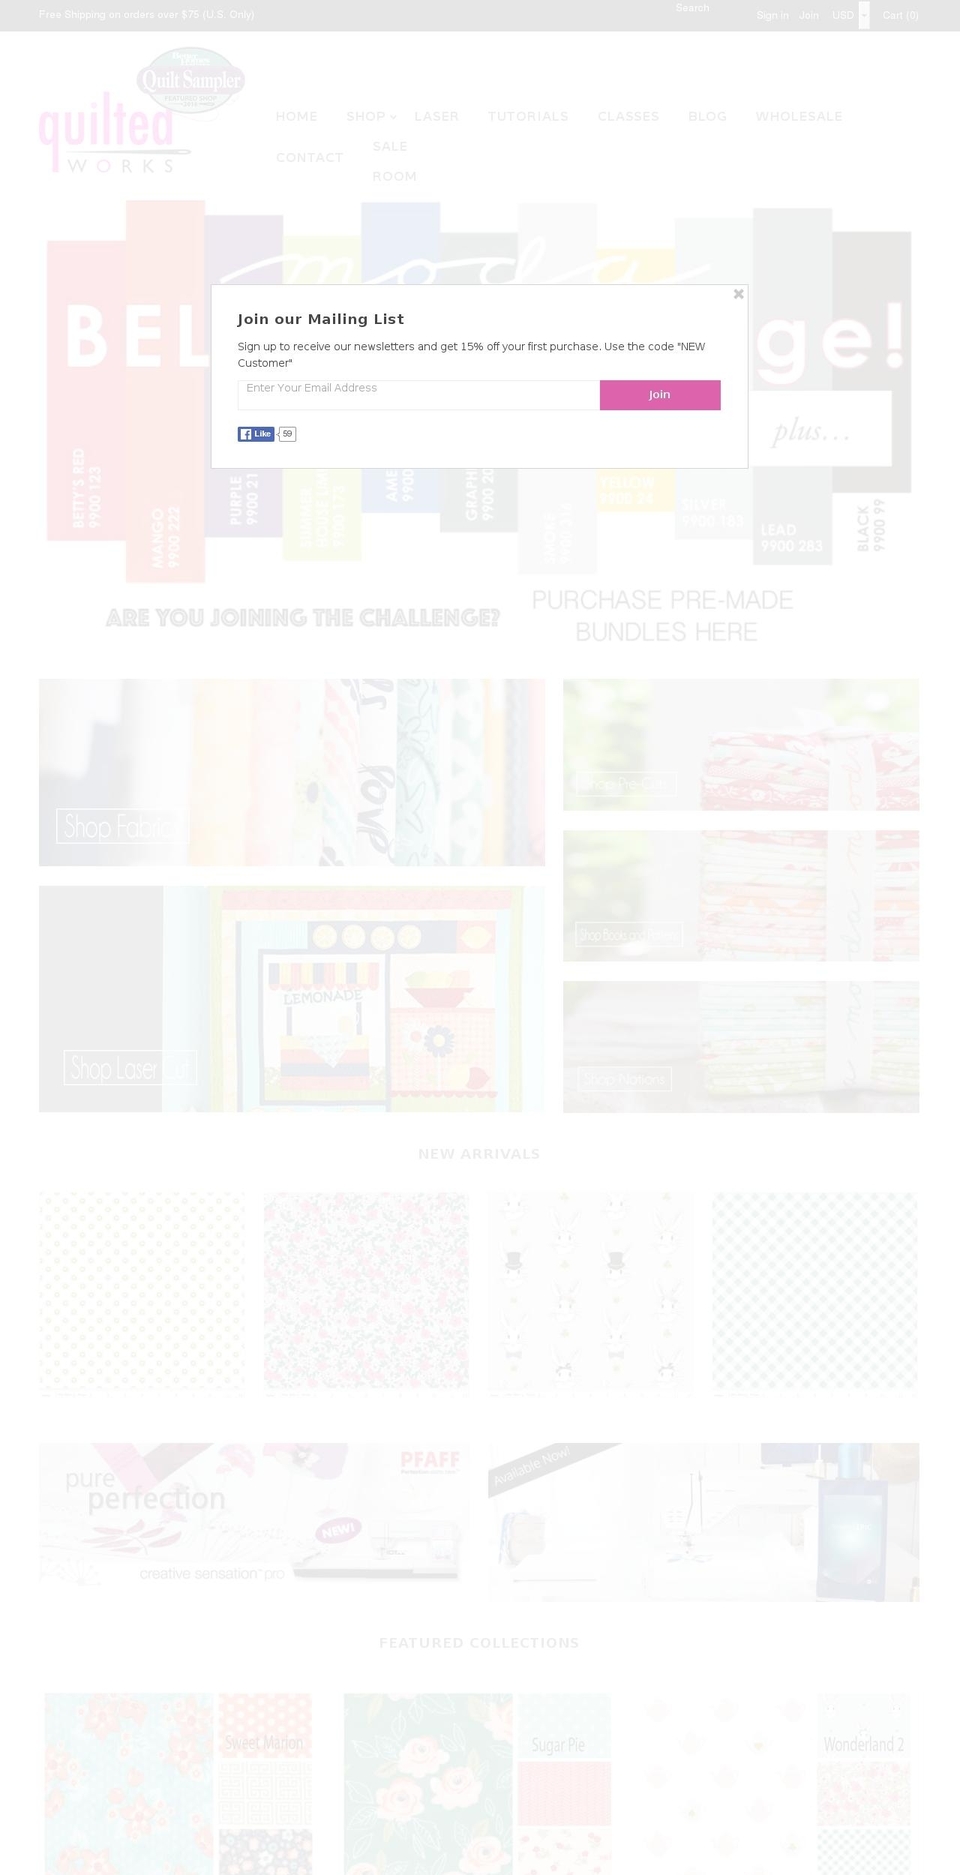 Mr Parker Shopify theme site example quiltedworks.com